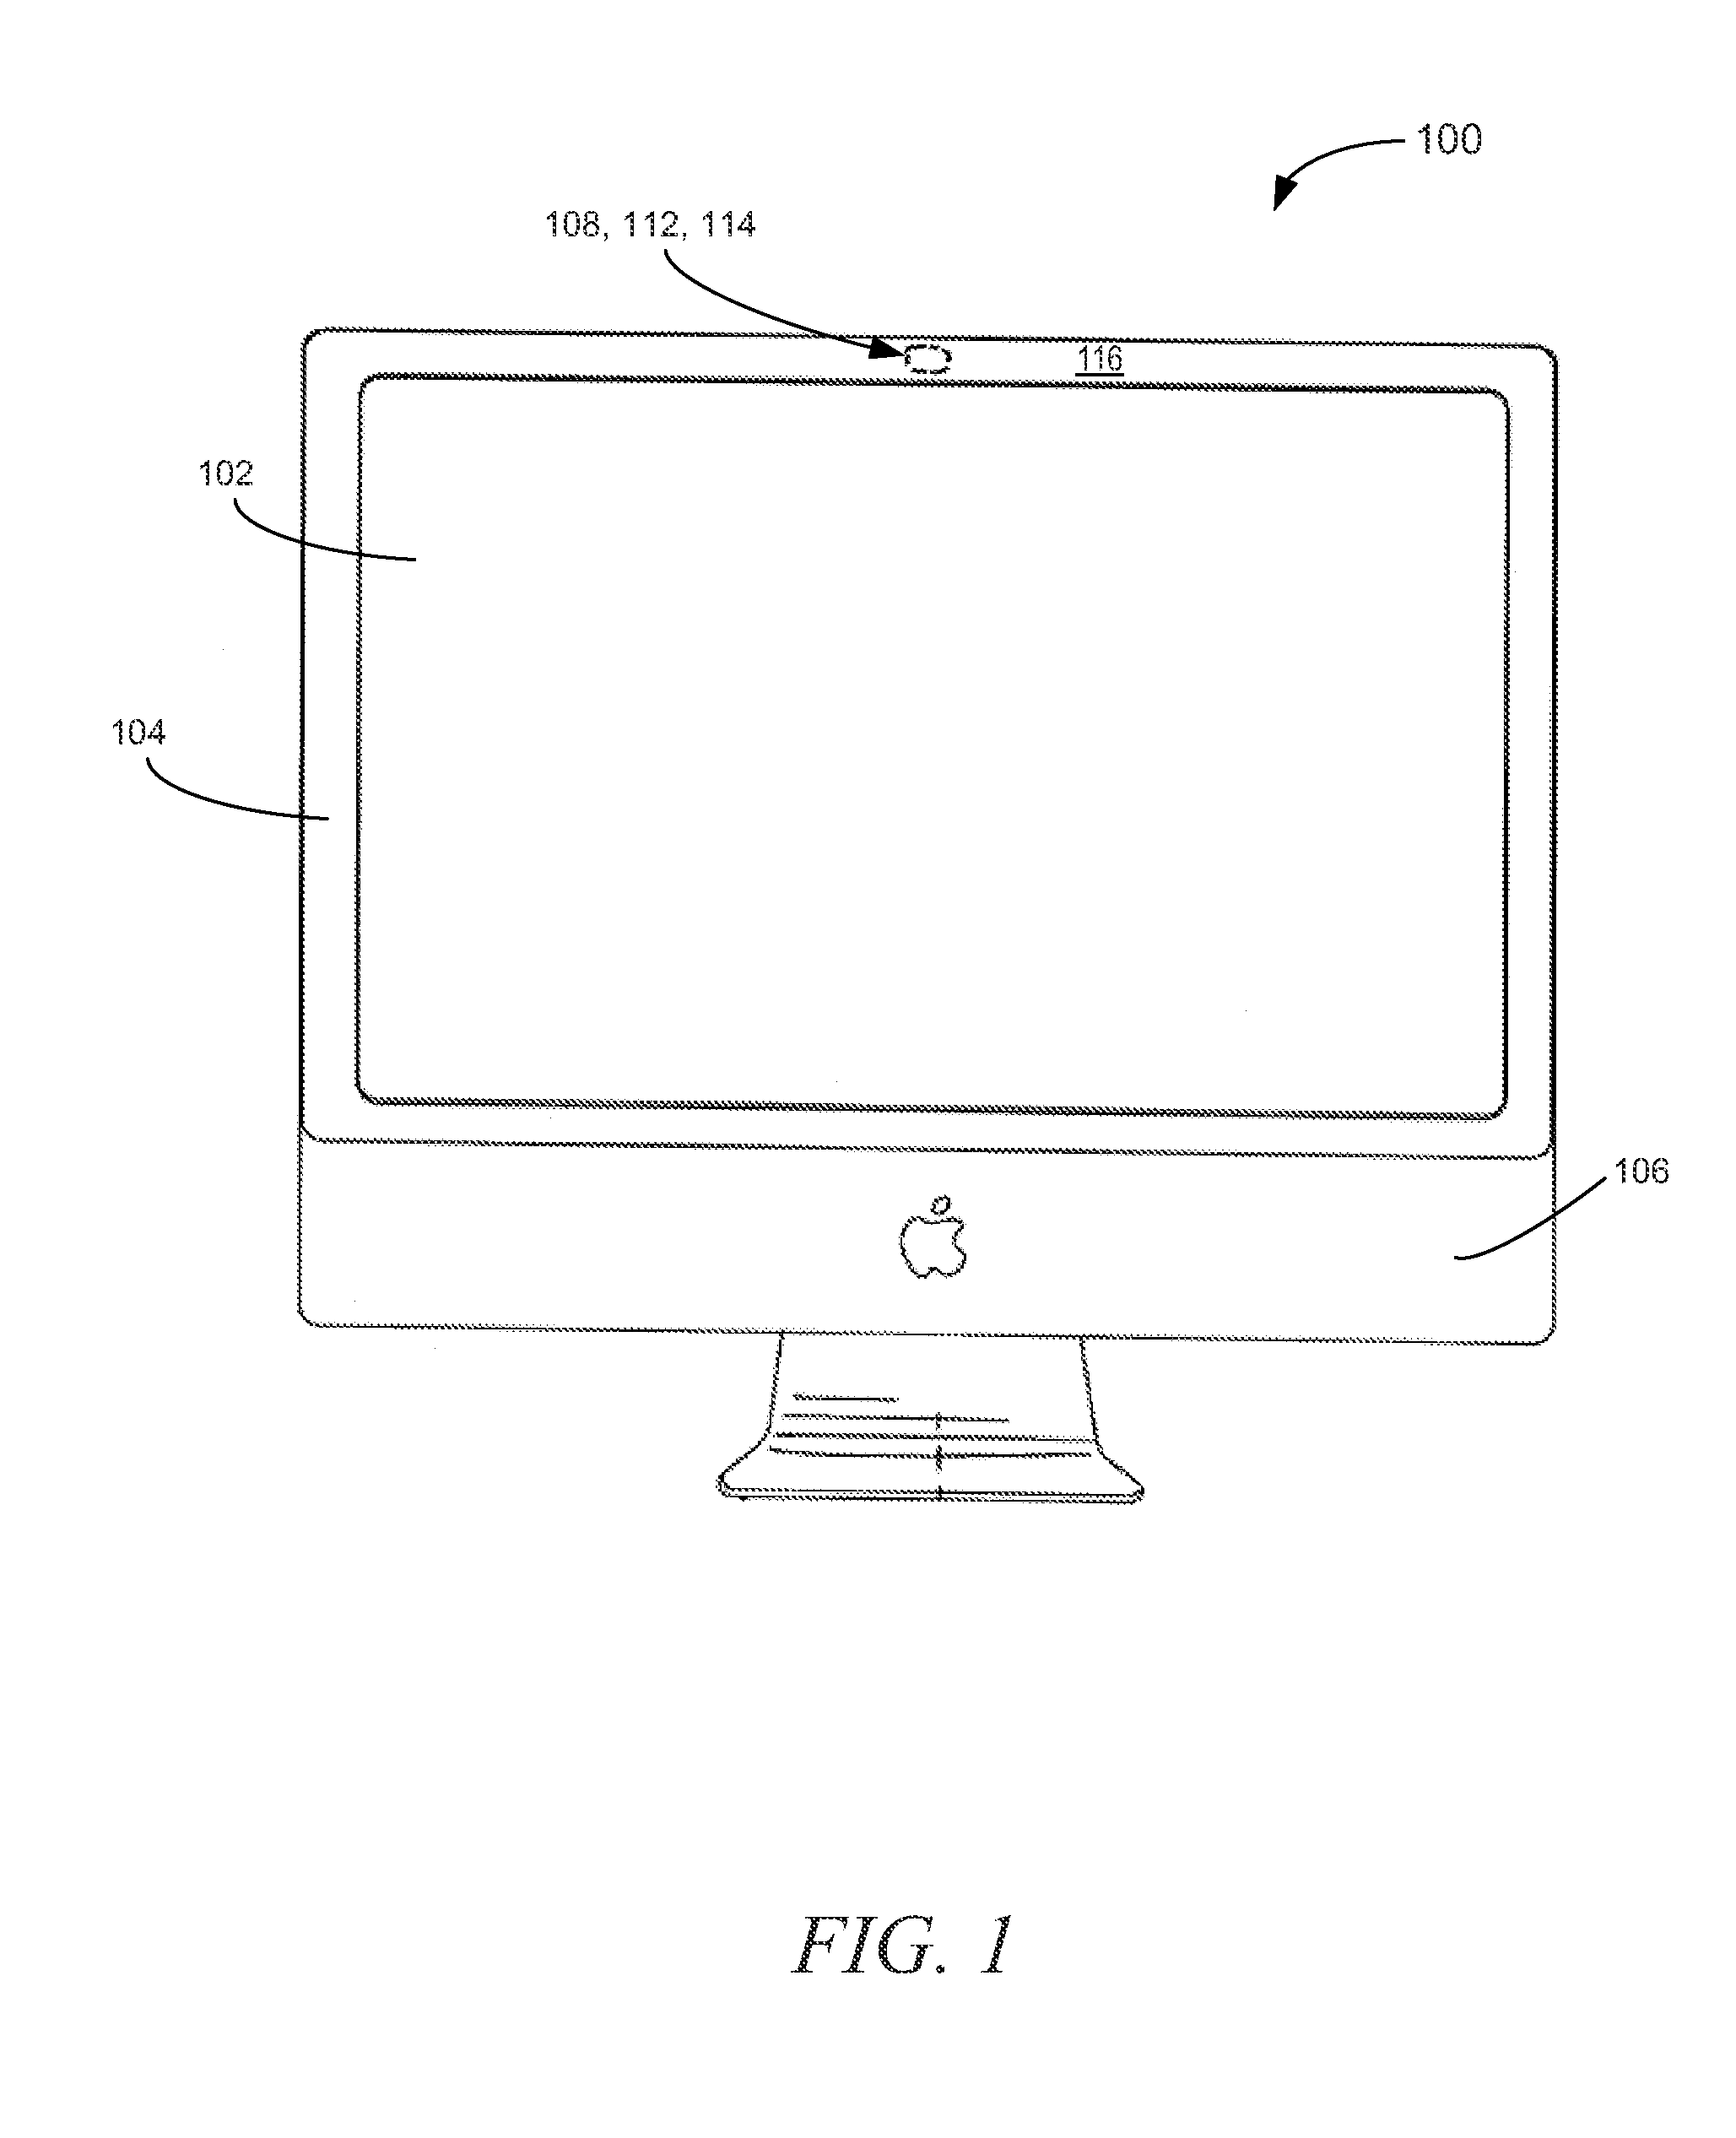 Methods and apparatus for concealing sensors and other components of electronic devices